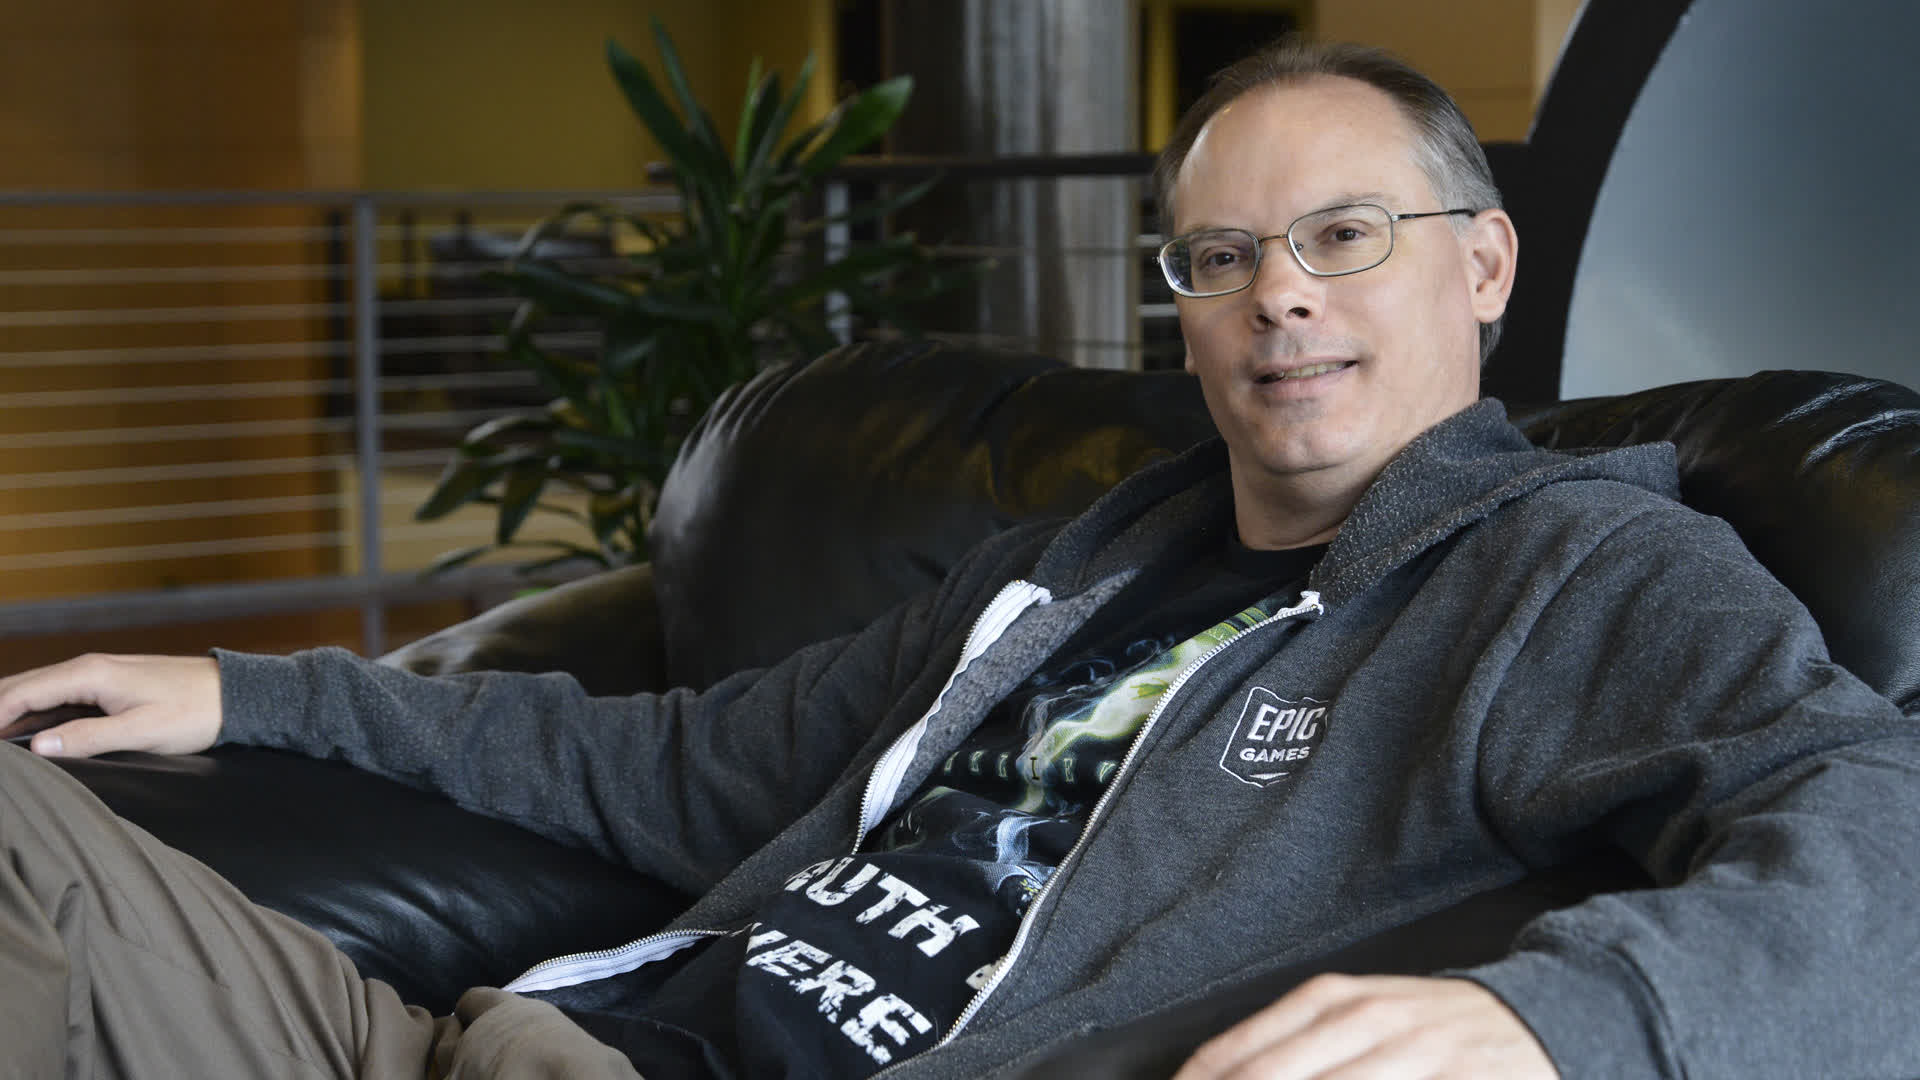 Epic Games boss Tim Sweeney warns that the Fortnite Token cryptocurrency is a scam